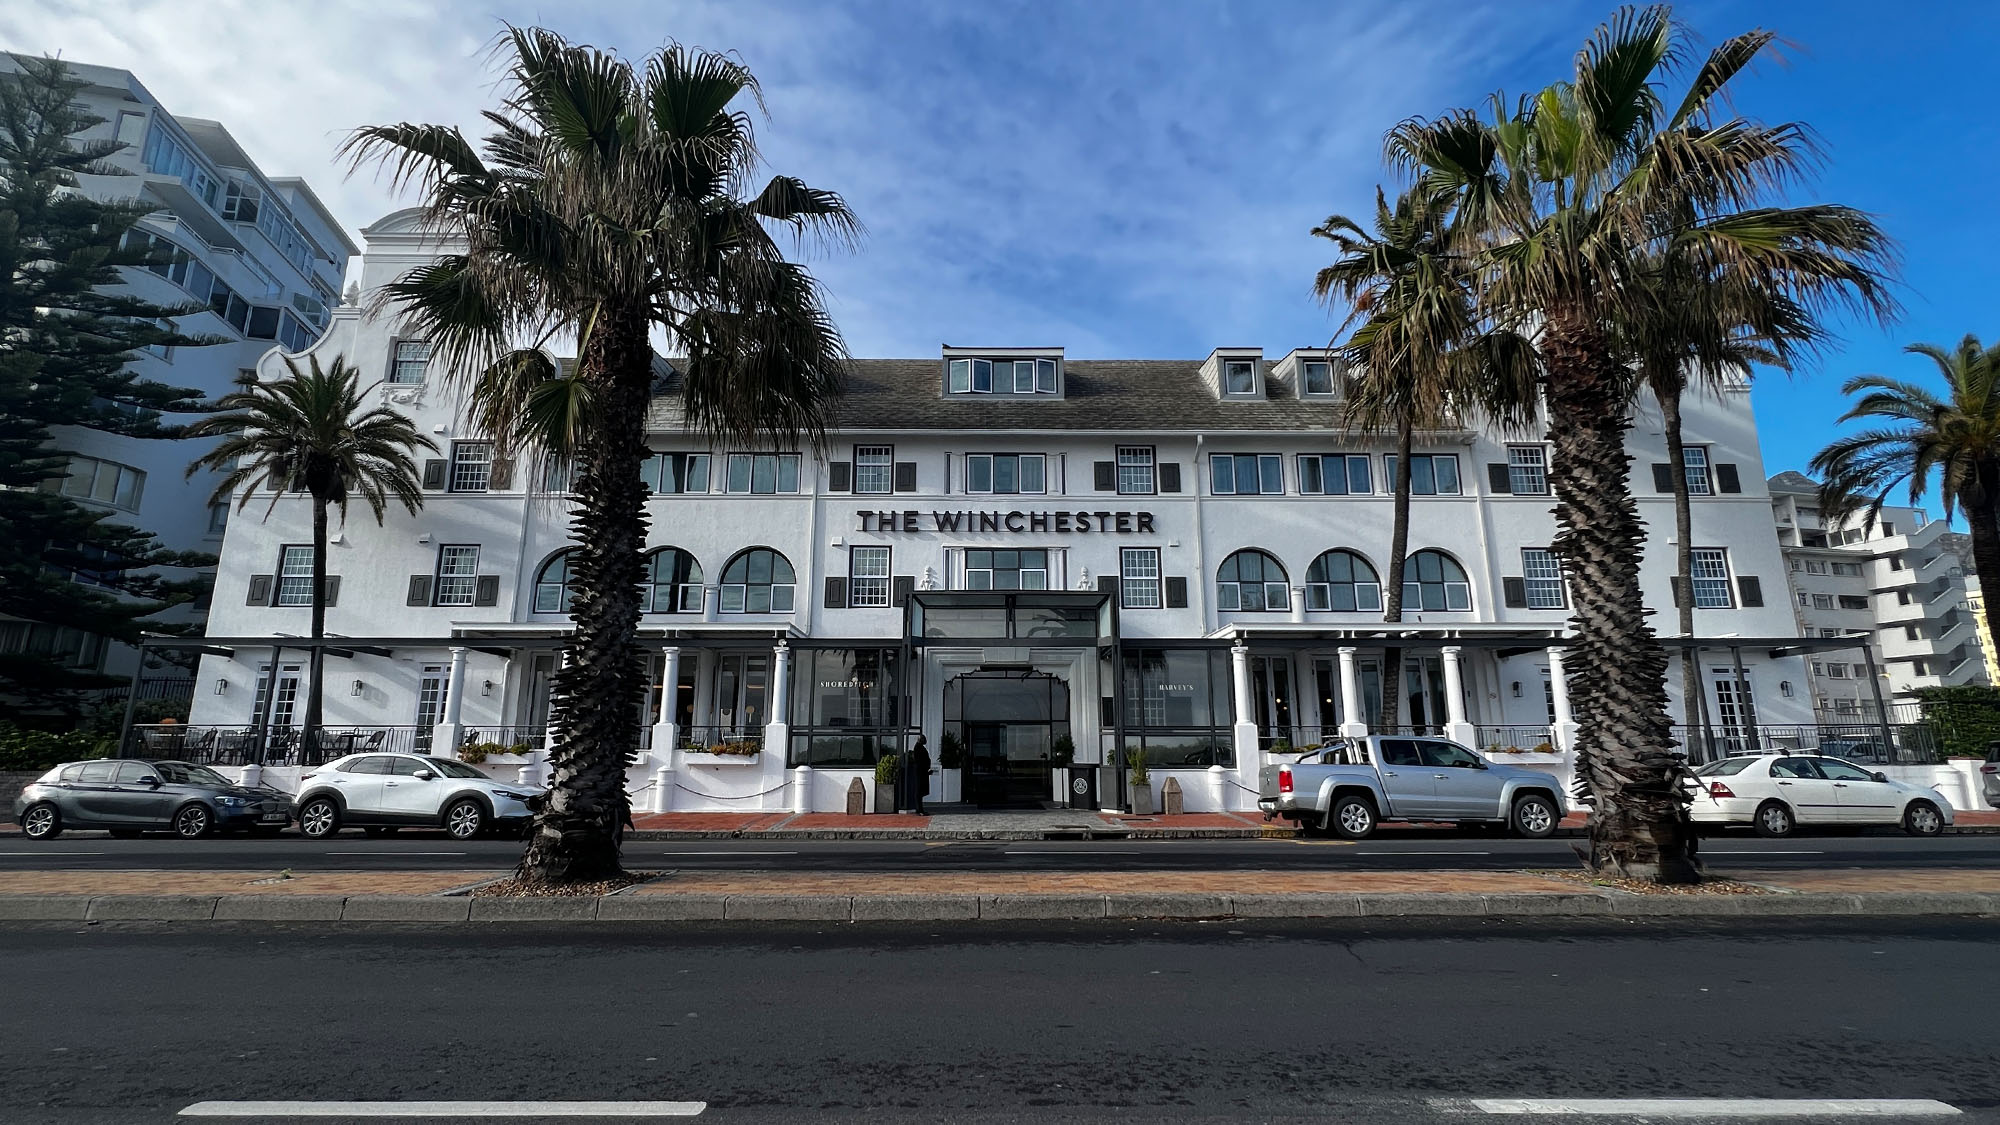 The Winchester Hotel